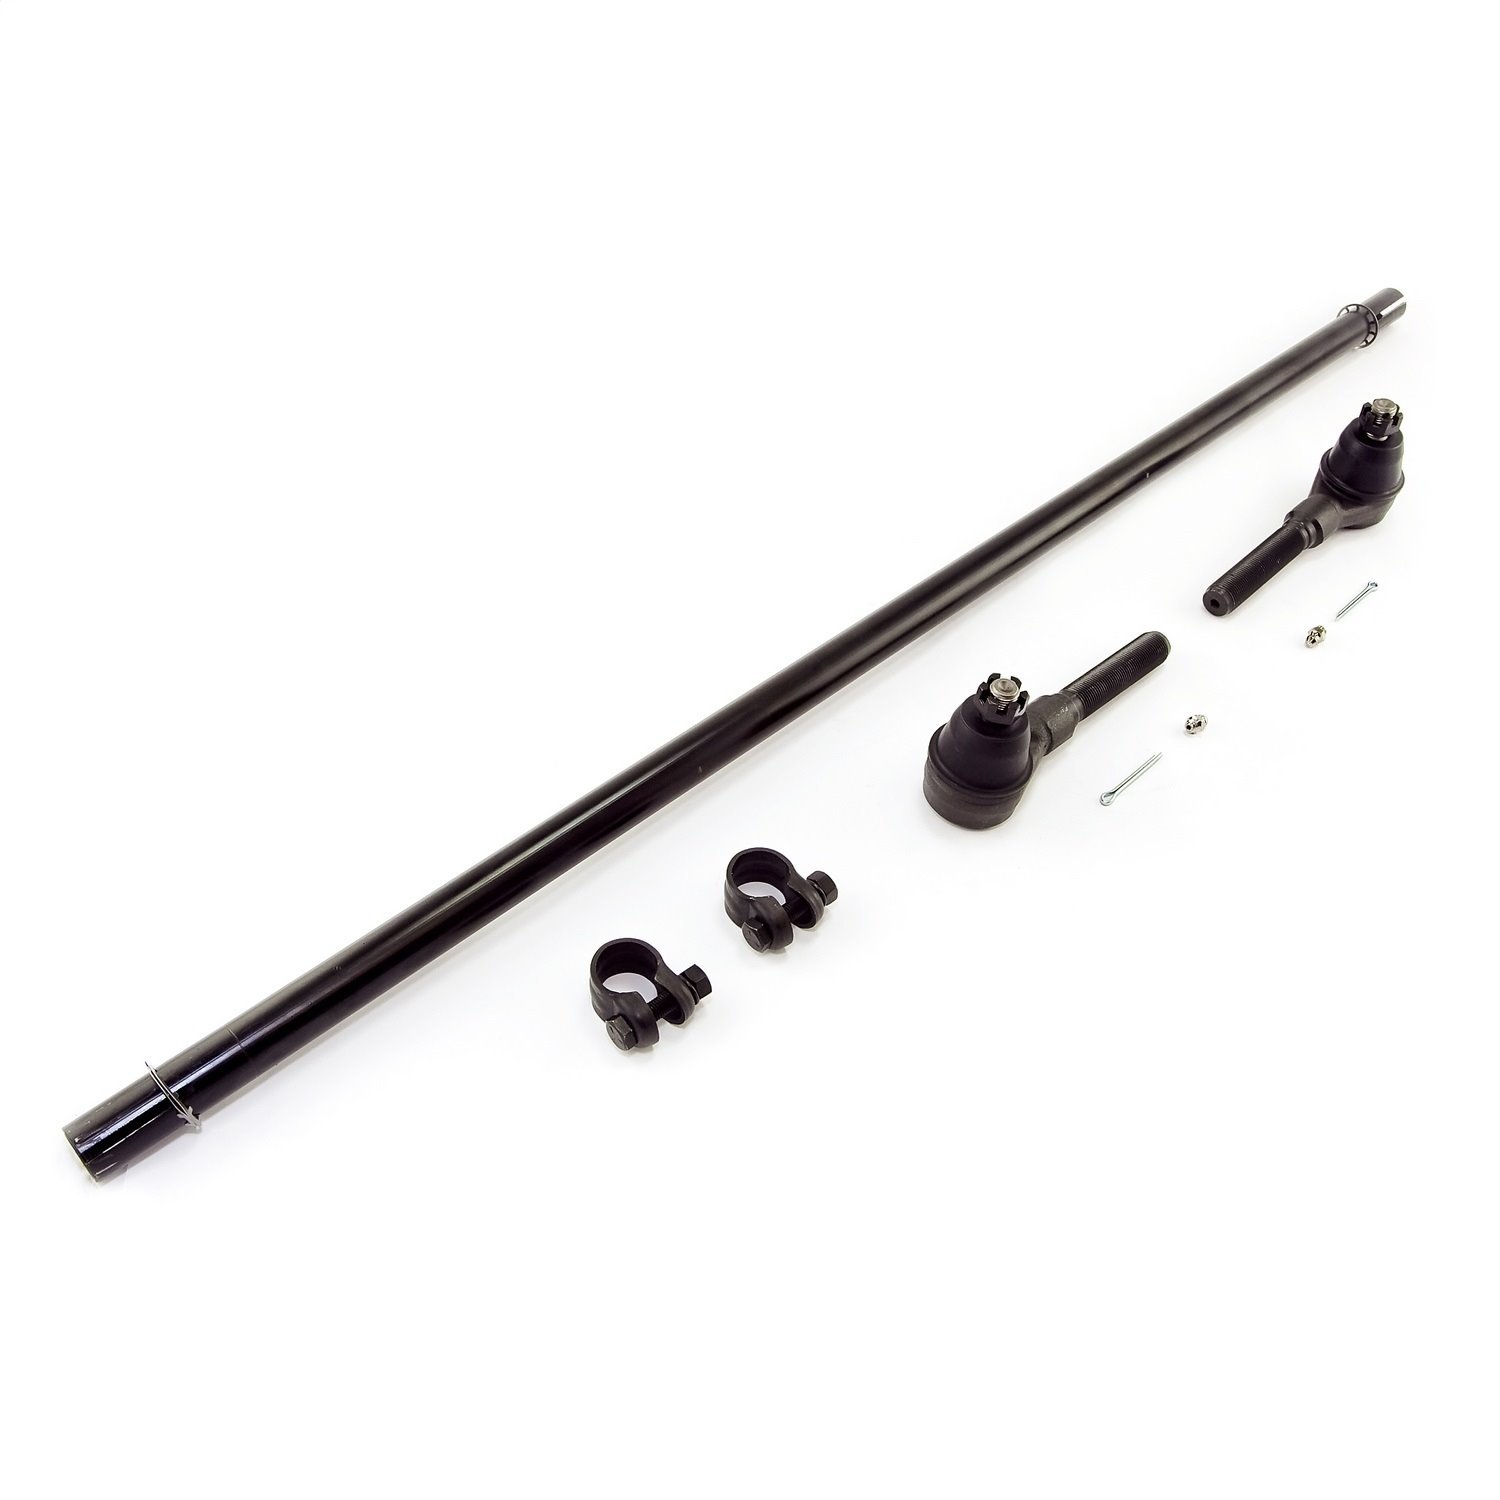 Stock replacement tie rod assembly kit from Omix-ADA, Fits 97-06 Jeep Wrangler It includes